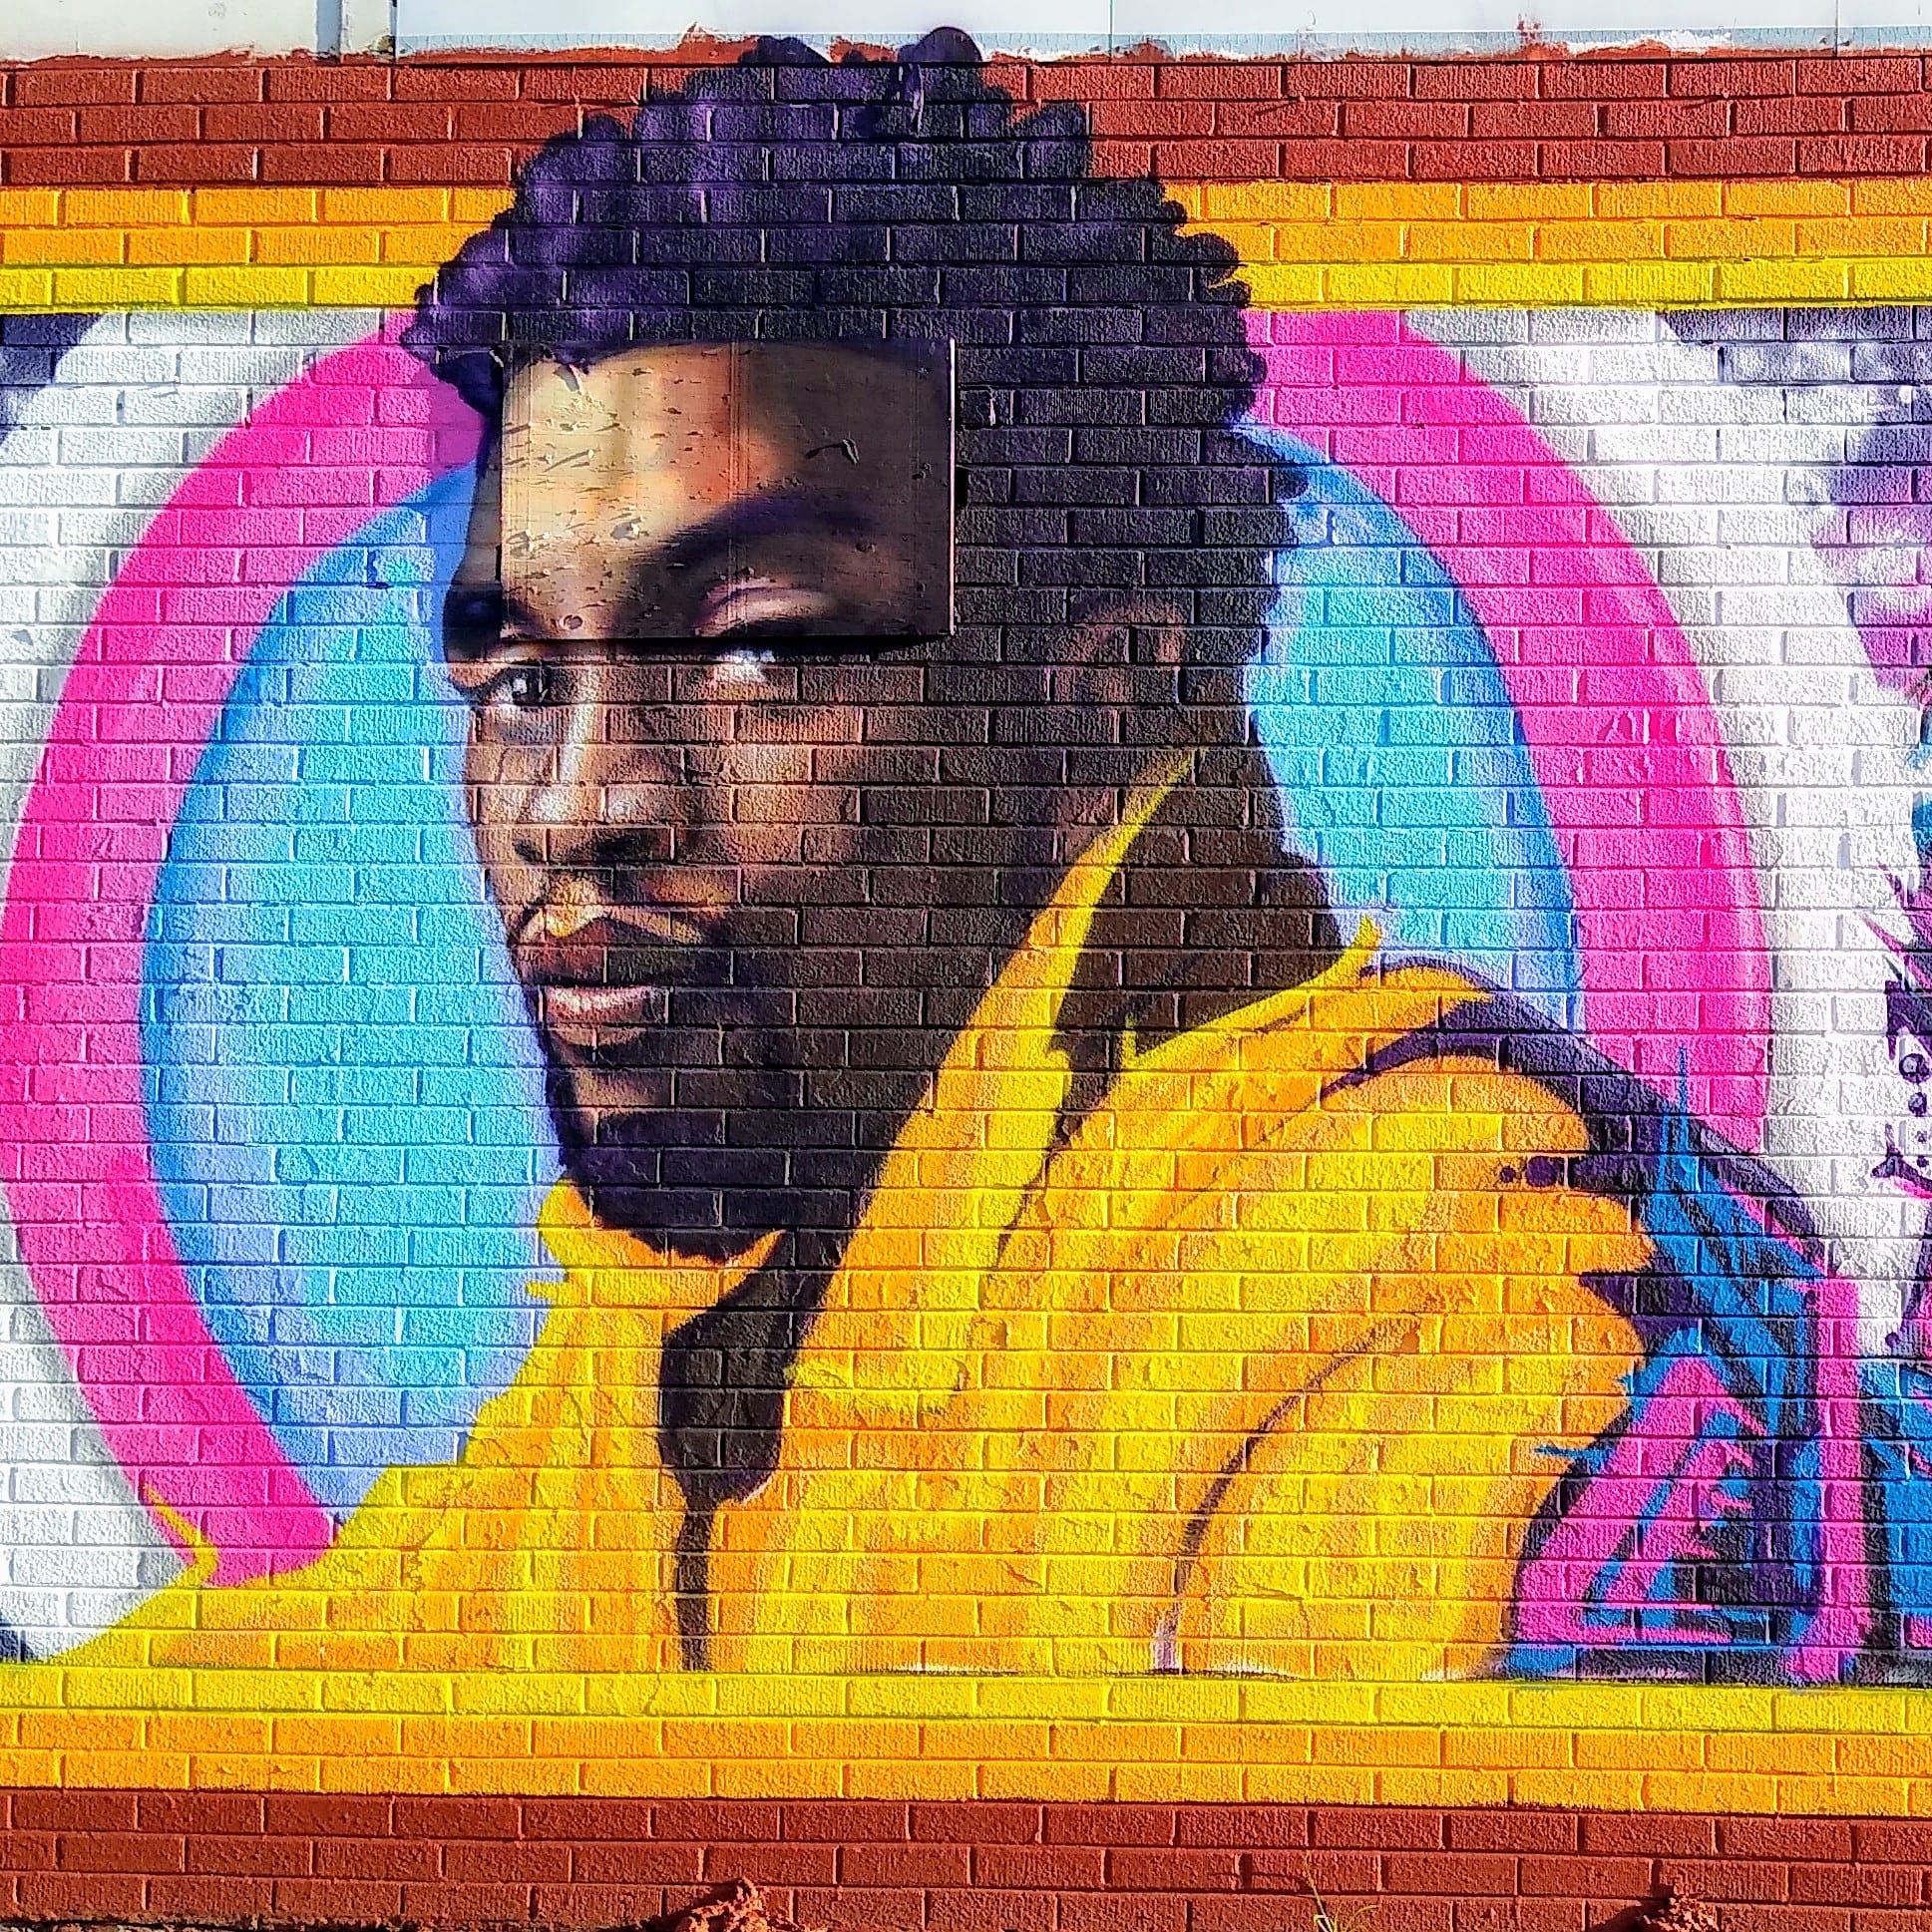 Rahmaan Statik . Be Your Higher Self / Chadwick Boseman / black panther mural . Spray paint on brick wall . 12x40ft . 89th and commerical . south chicago<br />